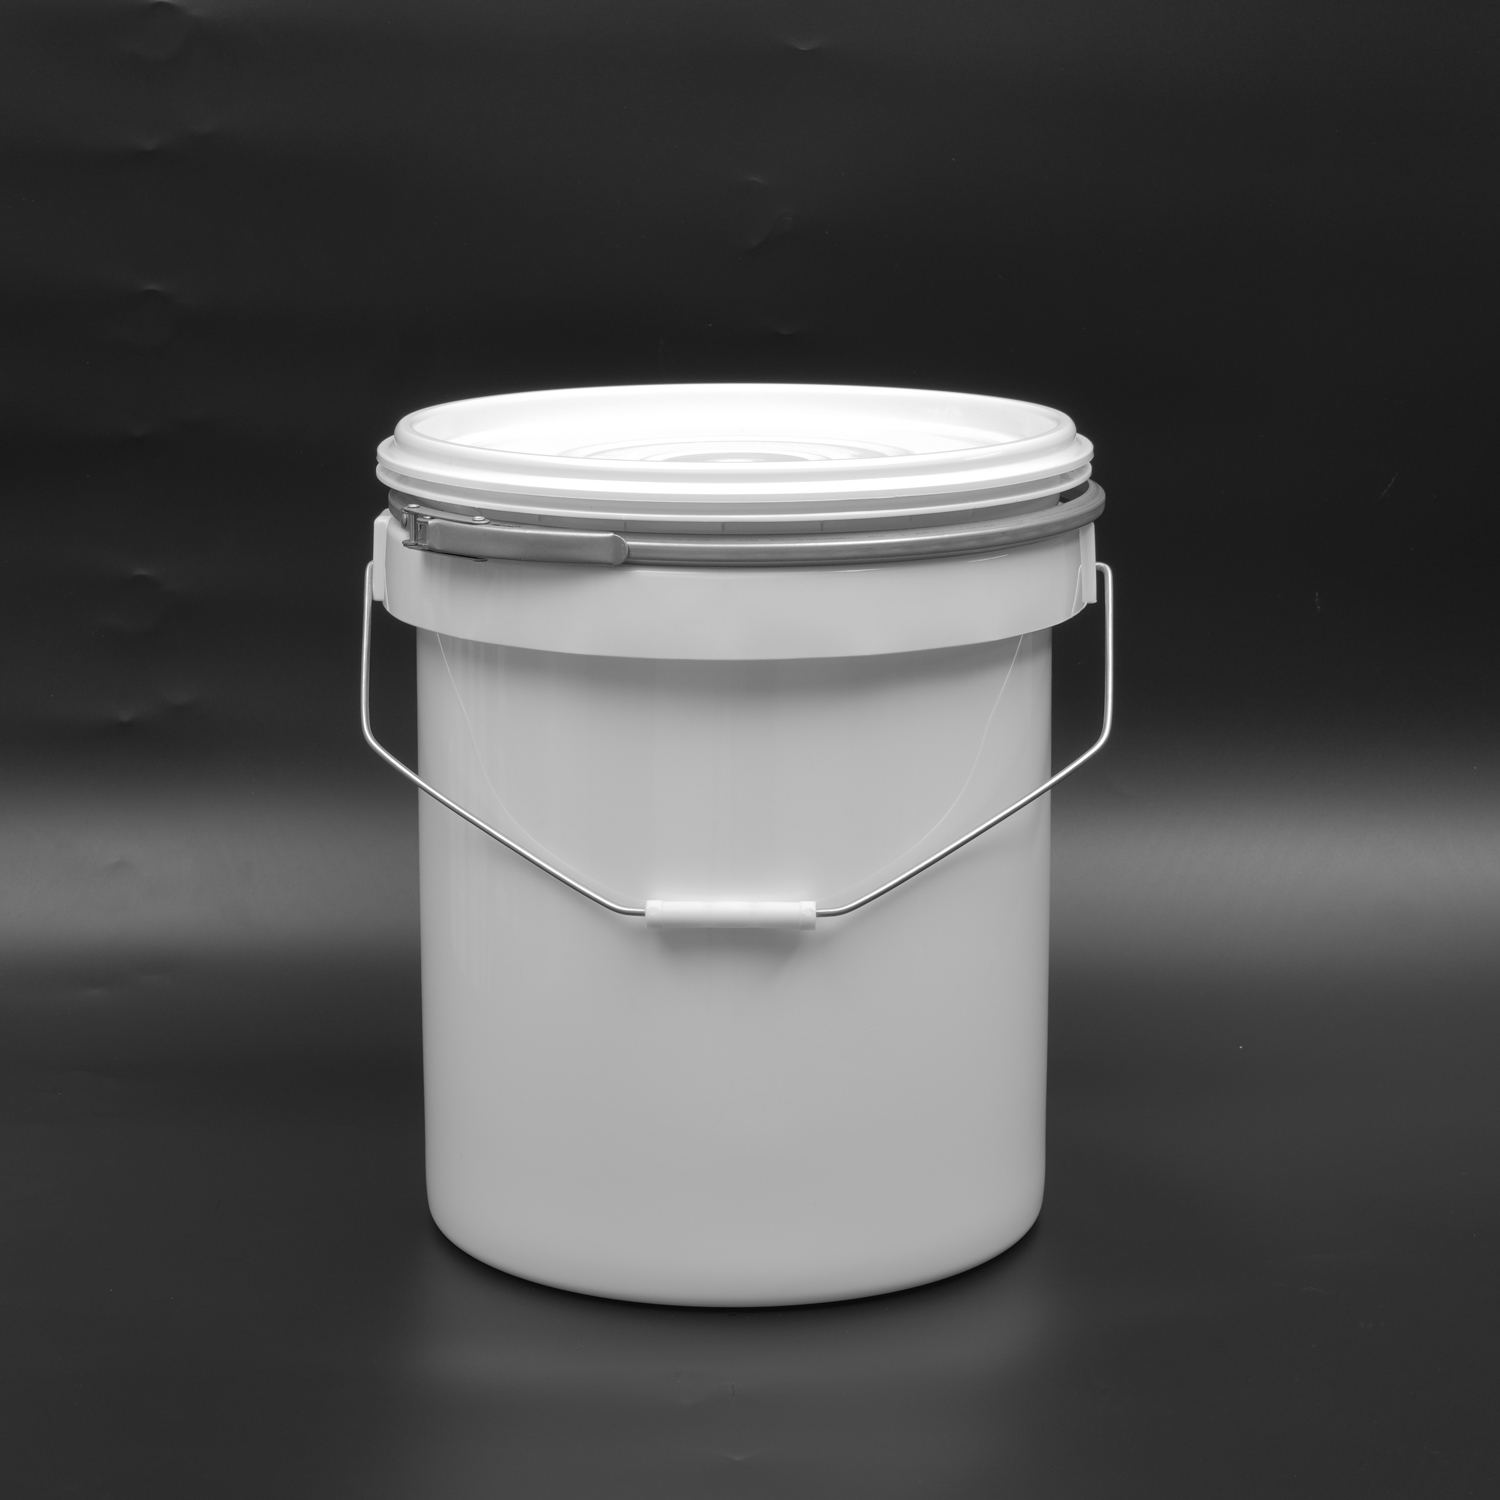 5 Gallon Plastic Pail B03-Cgr with Lid And Handle for Construction Adhesives